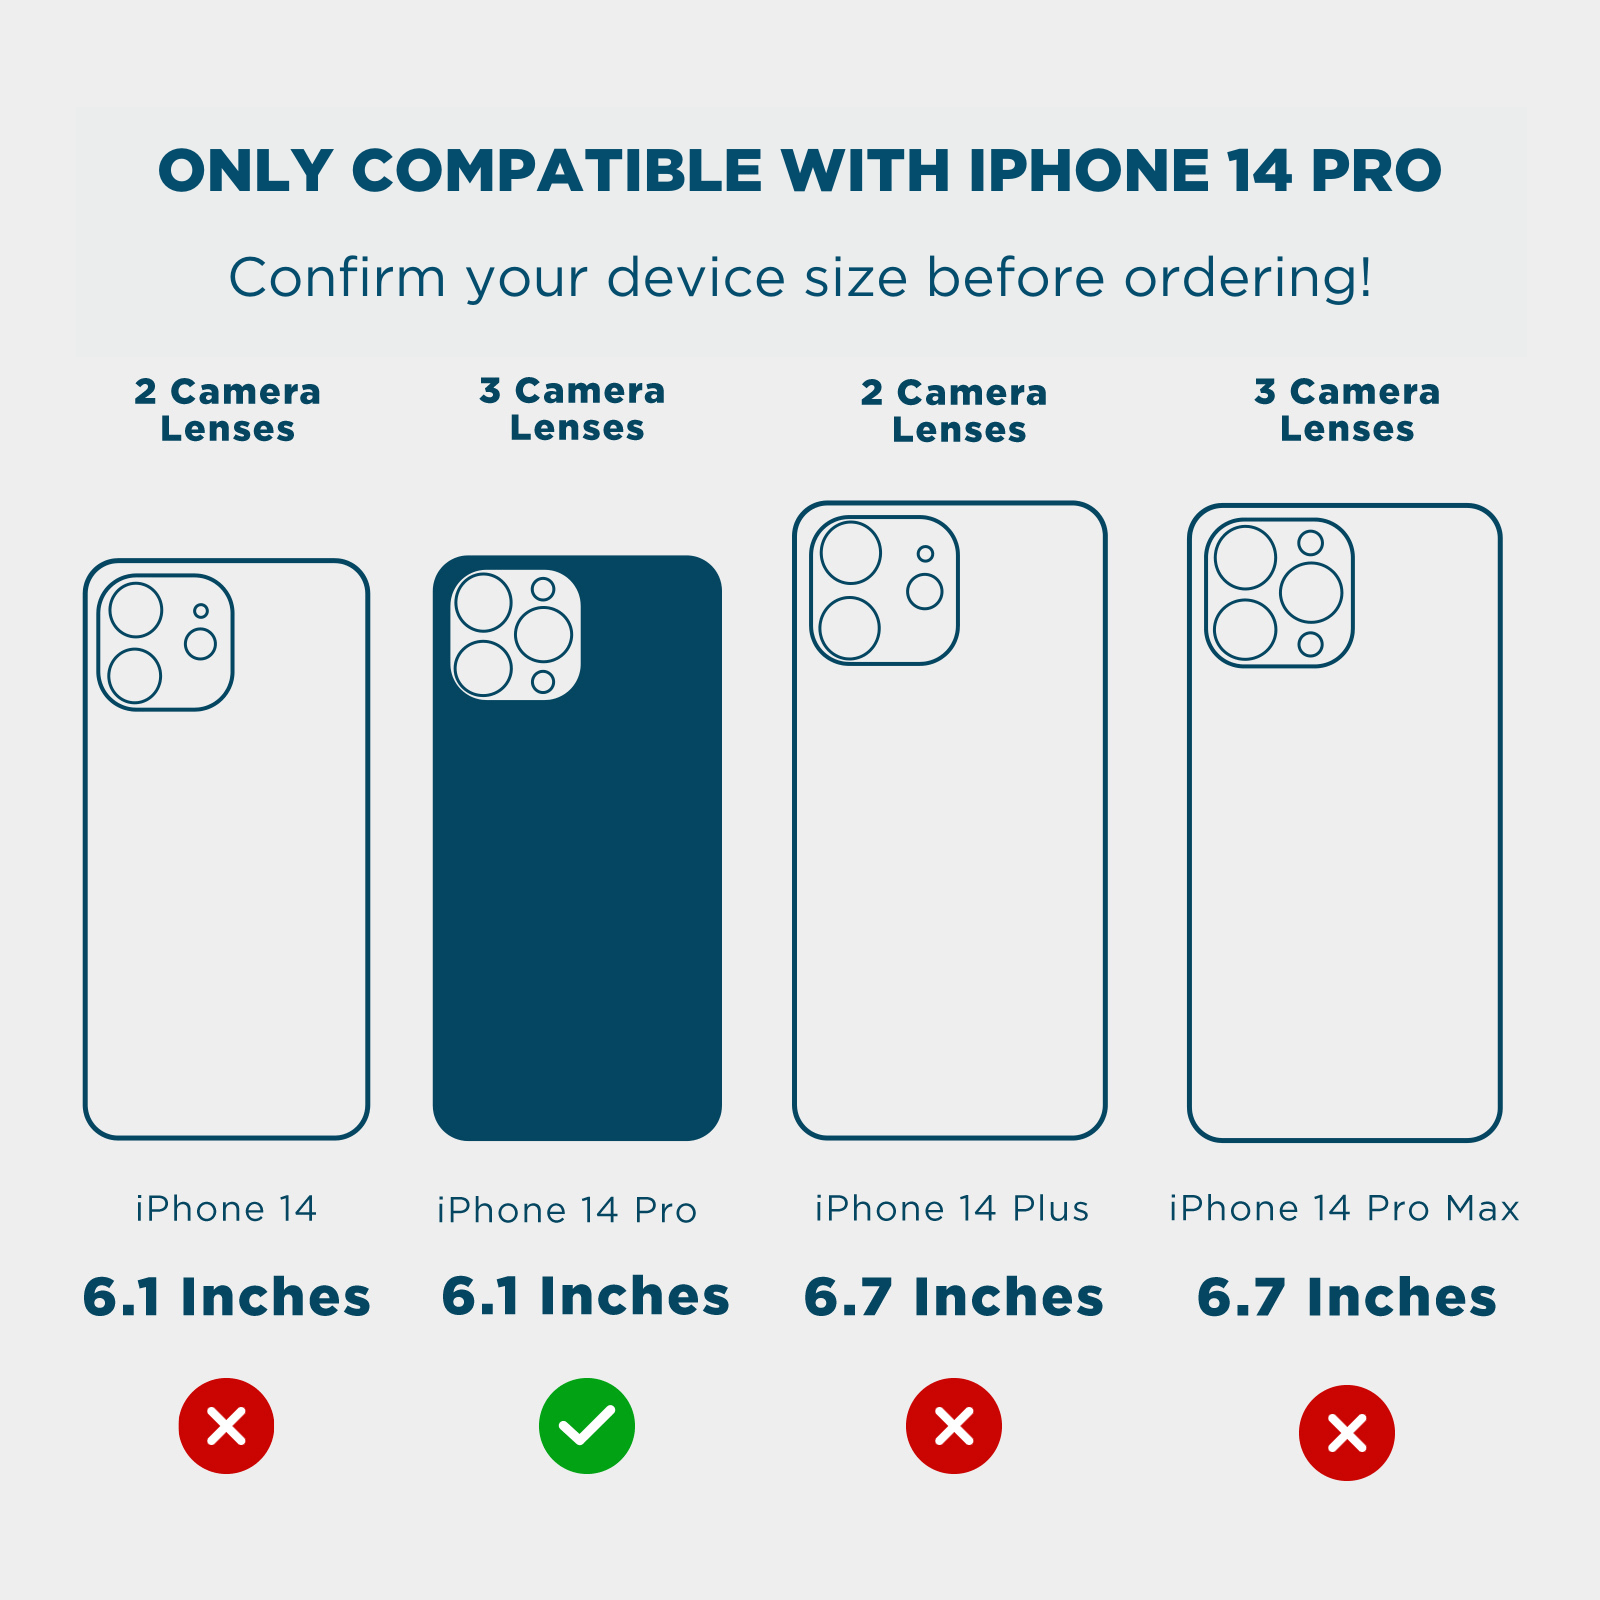 ONLY COMPATIBLE WITH IPHONE 14 PRO. CONFIRM YOUR DEVICE SIZE BEFORE ORDERING. 2 CAMERA LENSES, 3 CAMERA LENSES, 2 CAMERA LENSES, 3 CAMERA LENSES, 6.1, 6.1, 6.7, 6.7. COLOR::SOAP BUBBLE